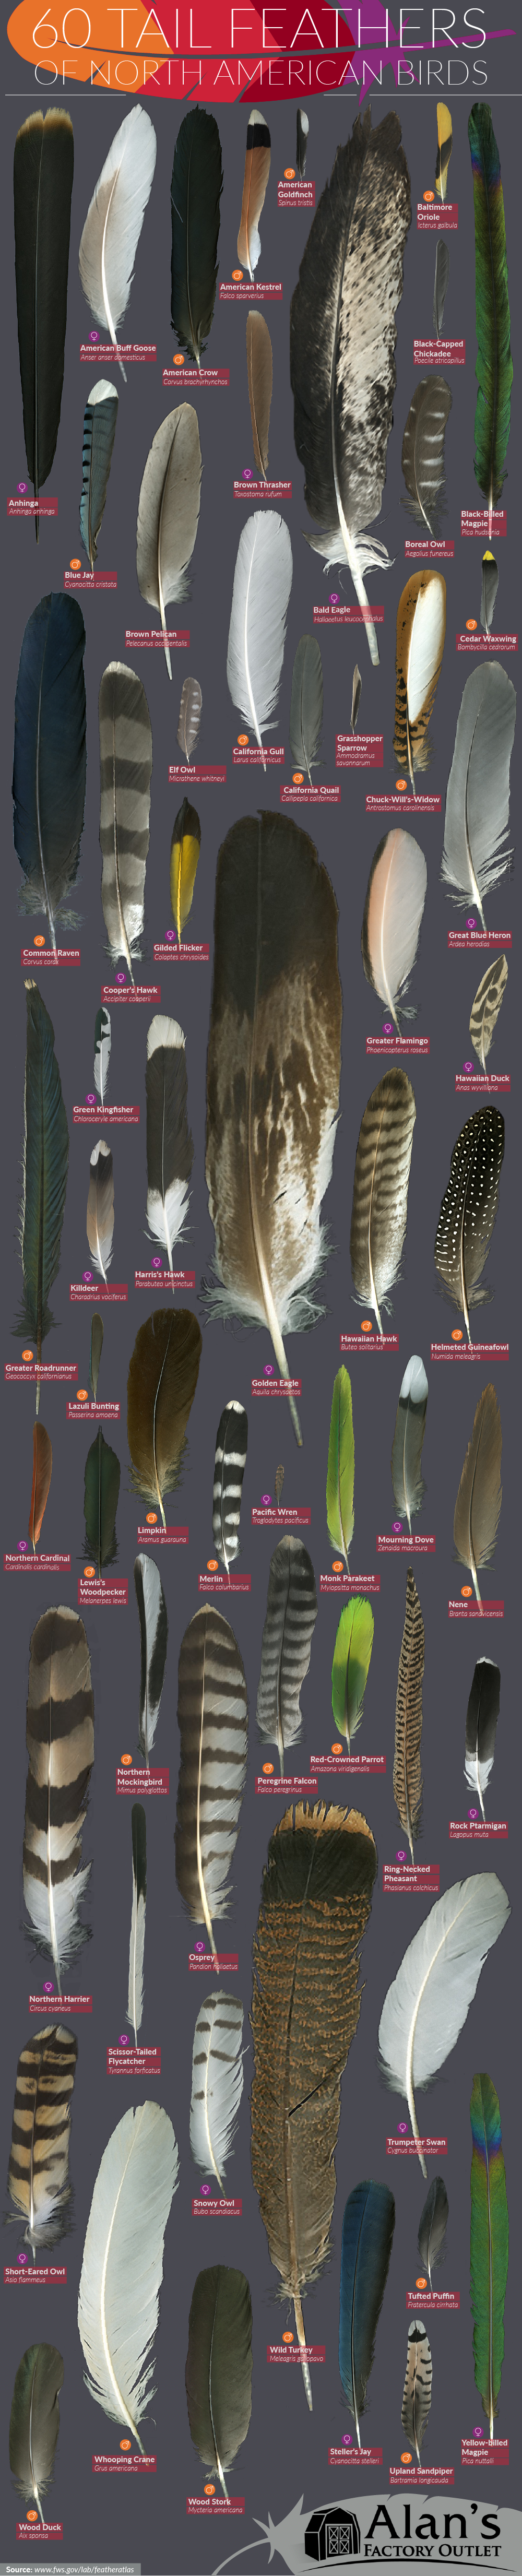 Master Identification Chart of 60 North American Birds’ Feathers - Infographic